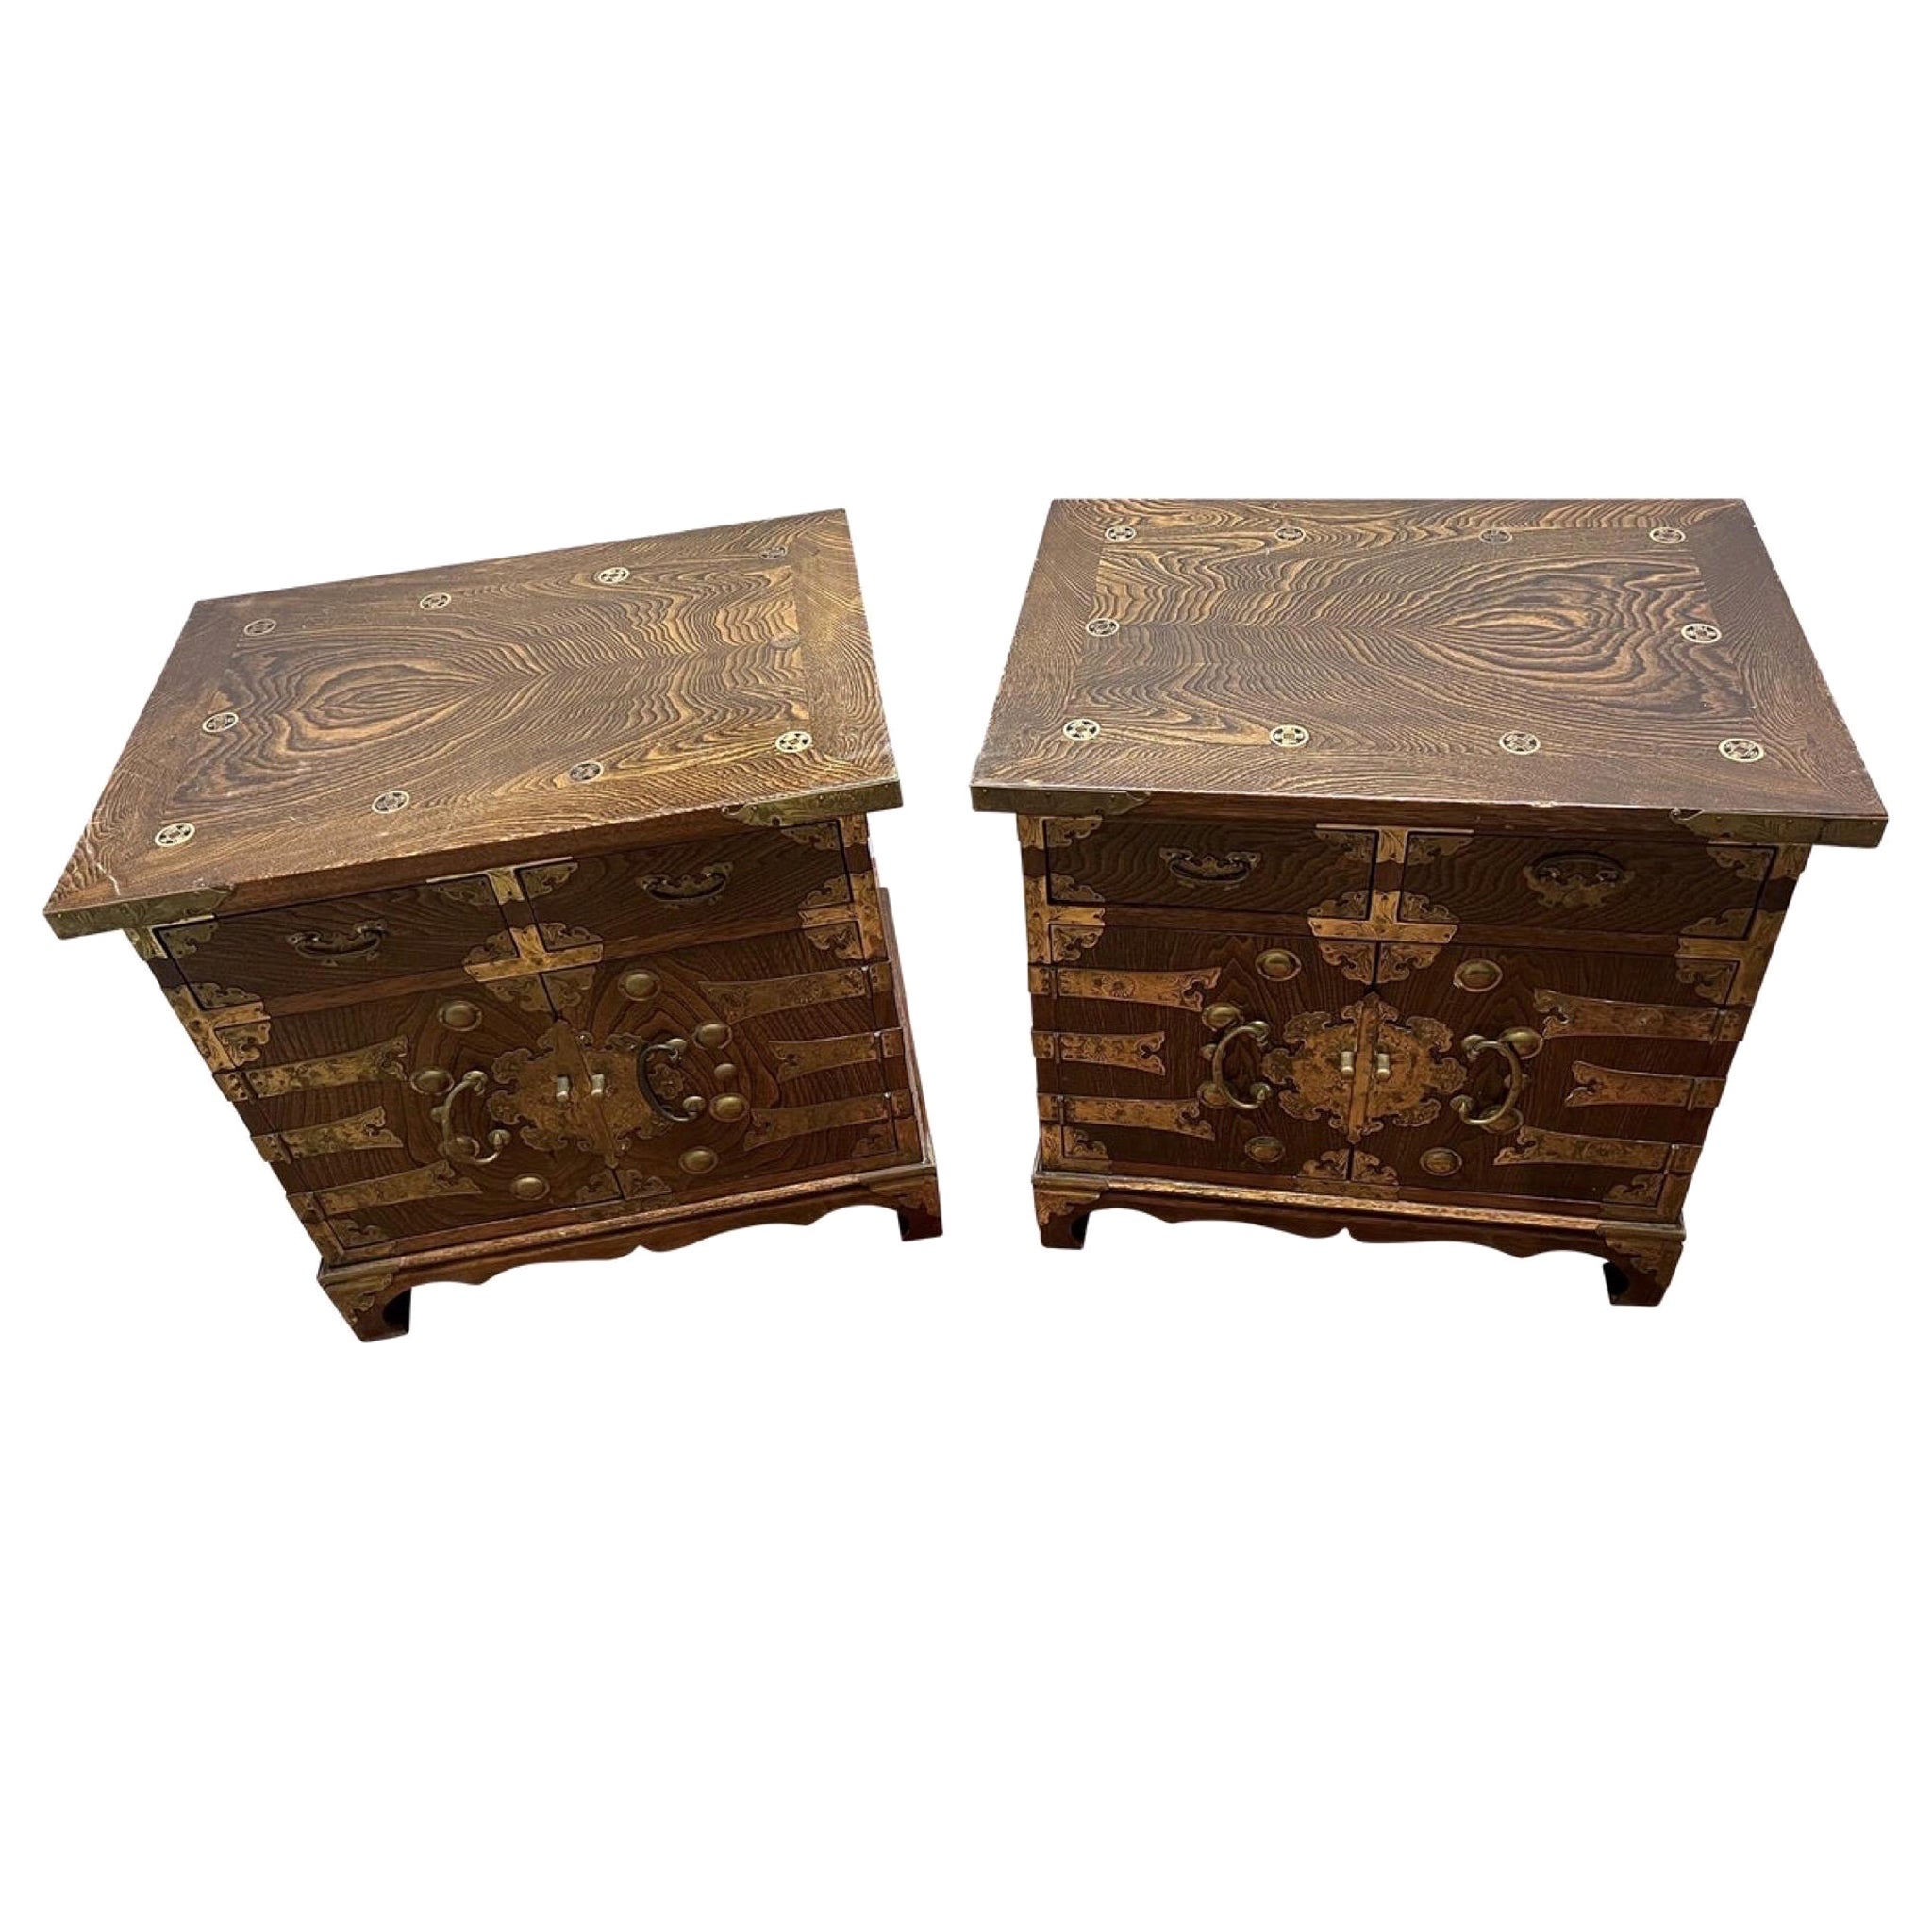 Korean Elm Wood and Brass Tansu Chests, a Pair